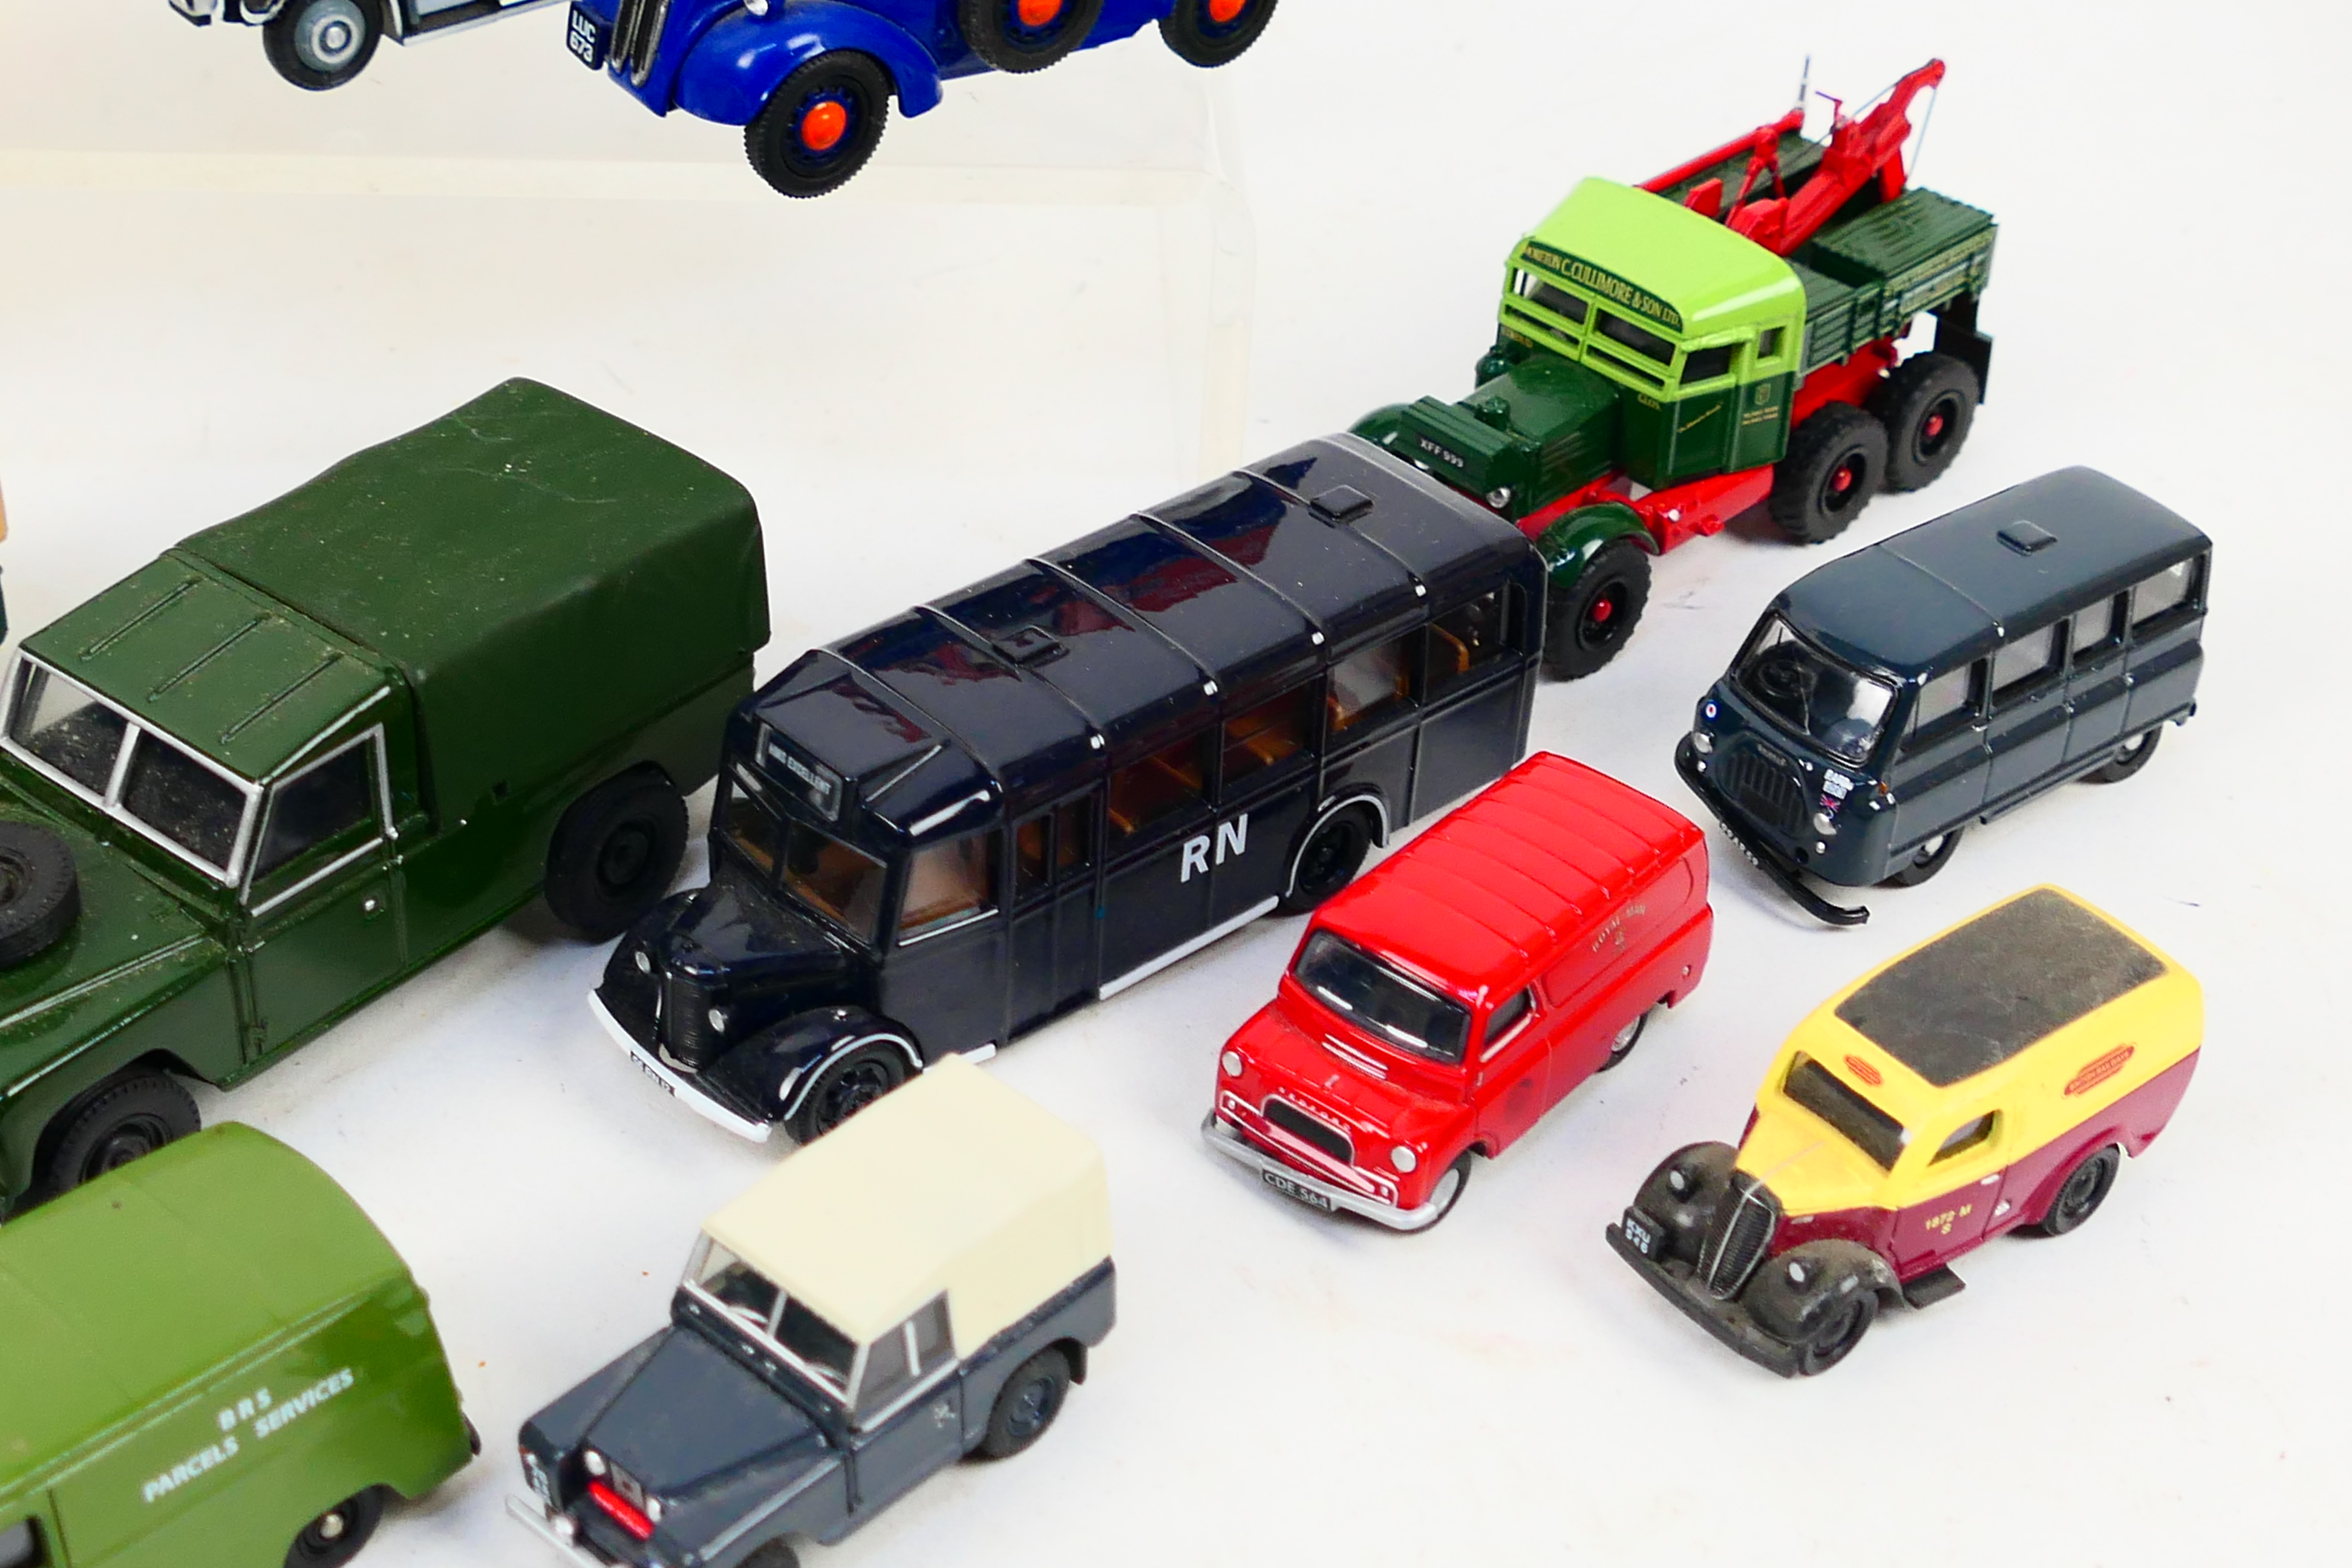 Oxford Diecast - Classix - Corgi - Lledo - Approximately 30 diecast model vehicles in various - Image 6 of 6